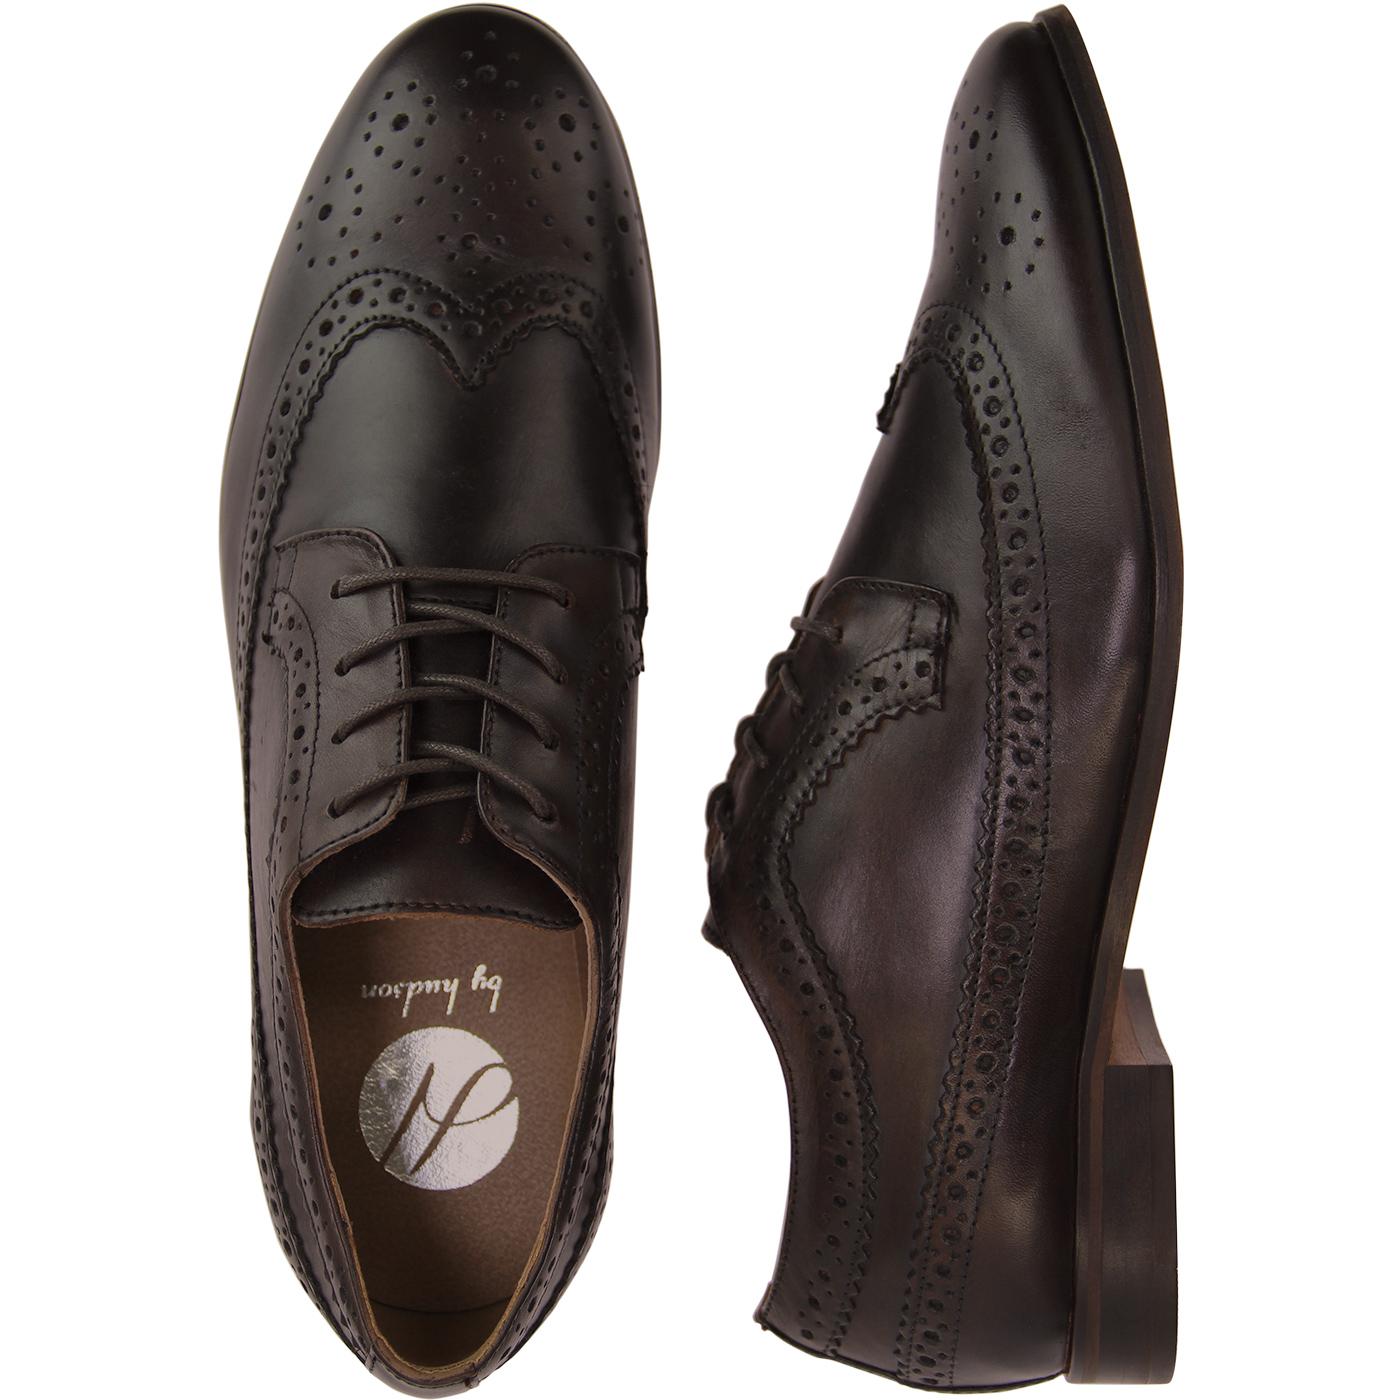 Retro 60s Mod Leather Brogues Brown